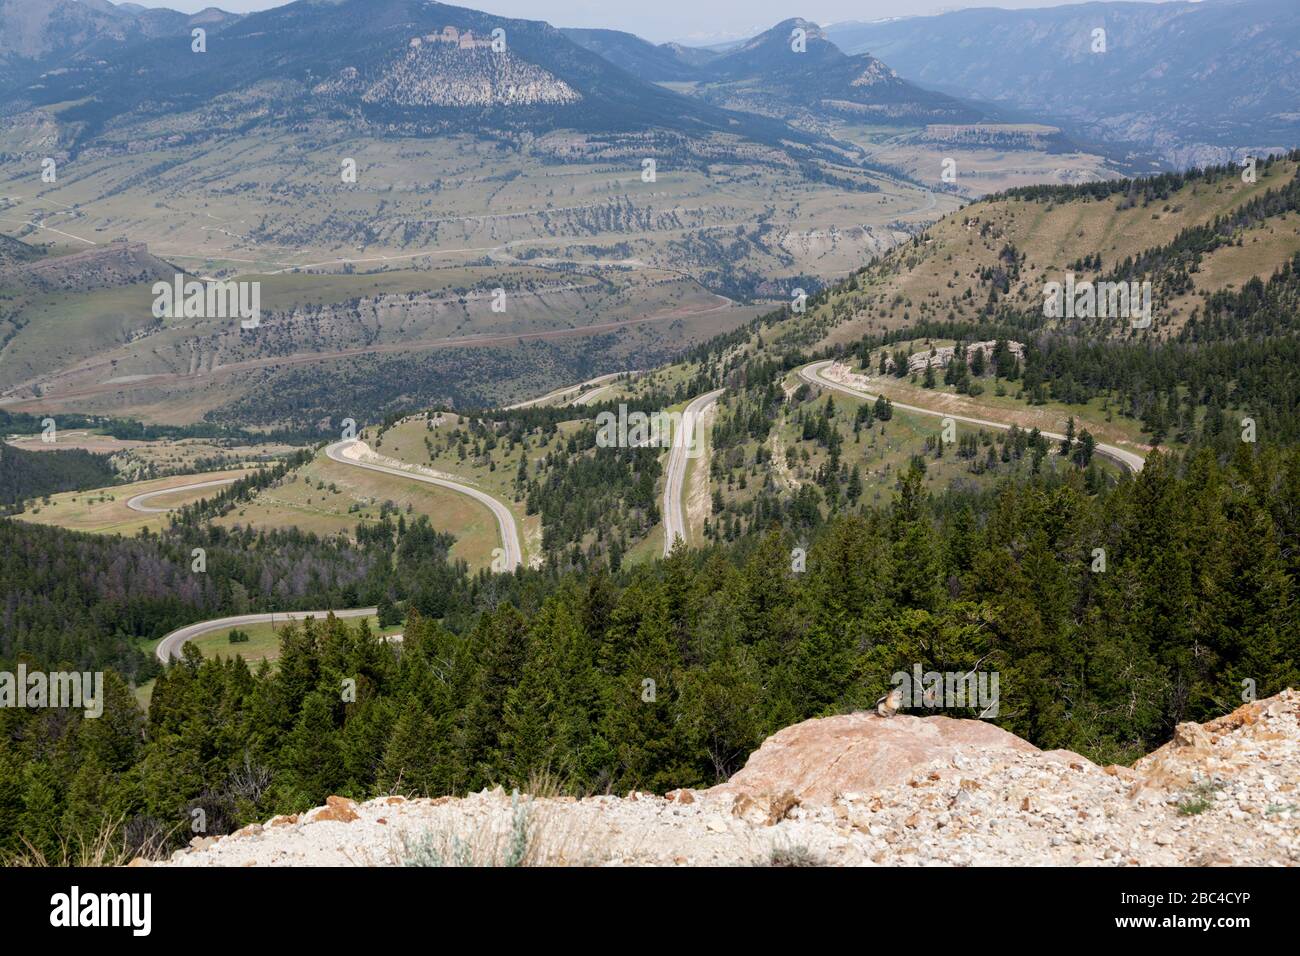 Overlooking the valley and Route 296 as it winds down the mountain as seen from Dead Indian Overlook in Yellowstone National Park, Wyoming. Stock Photo